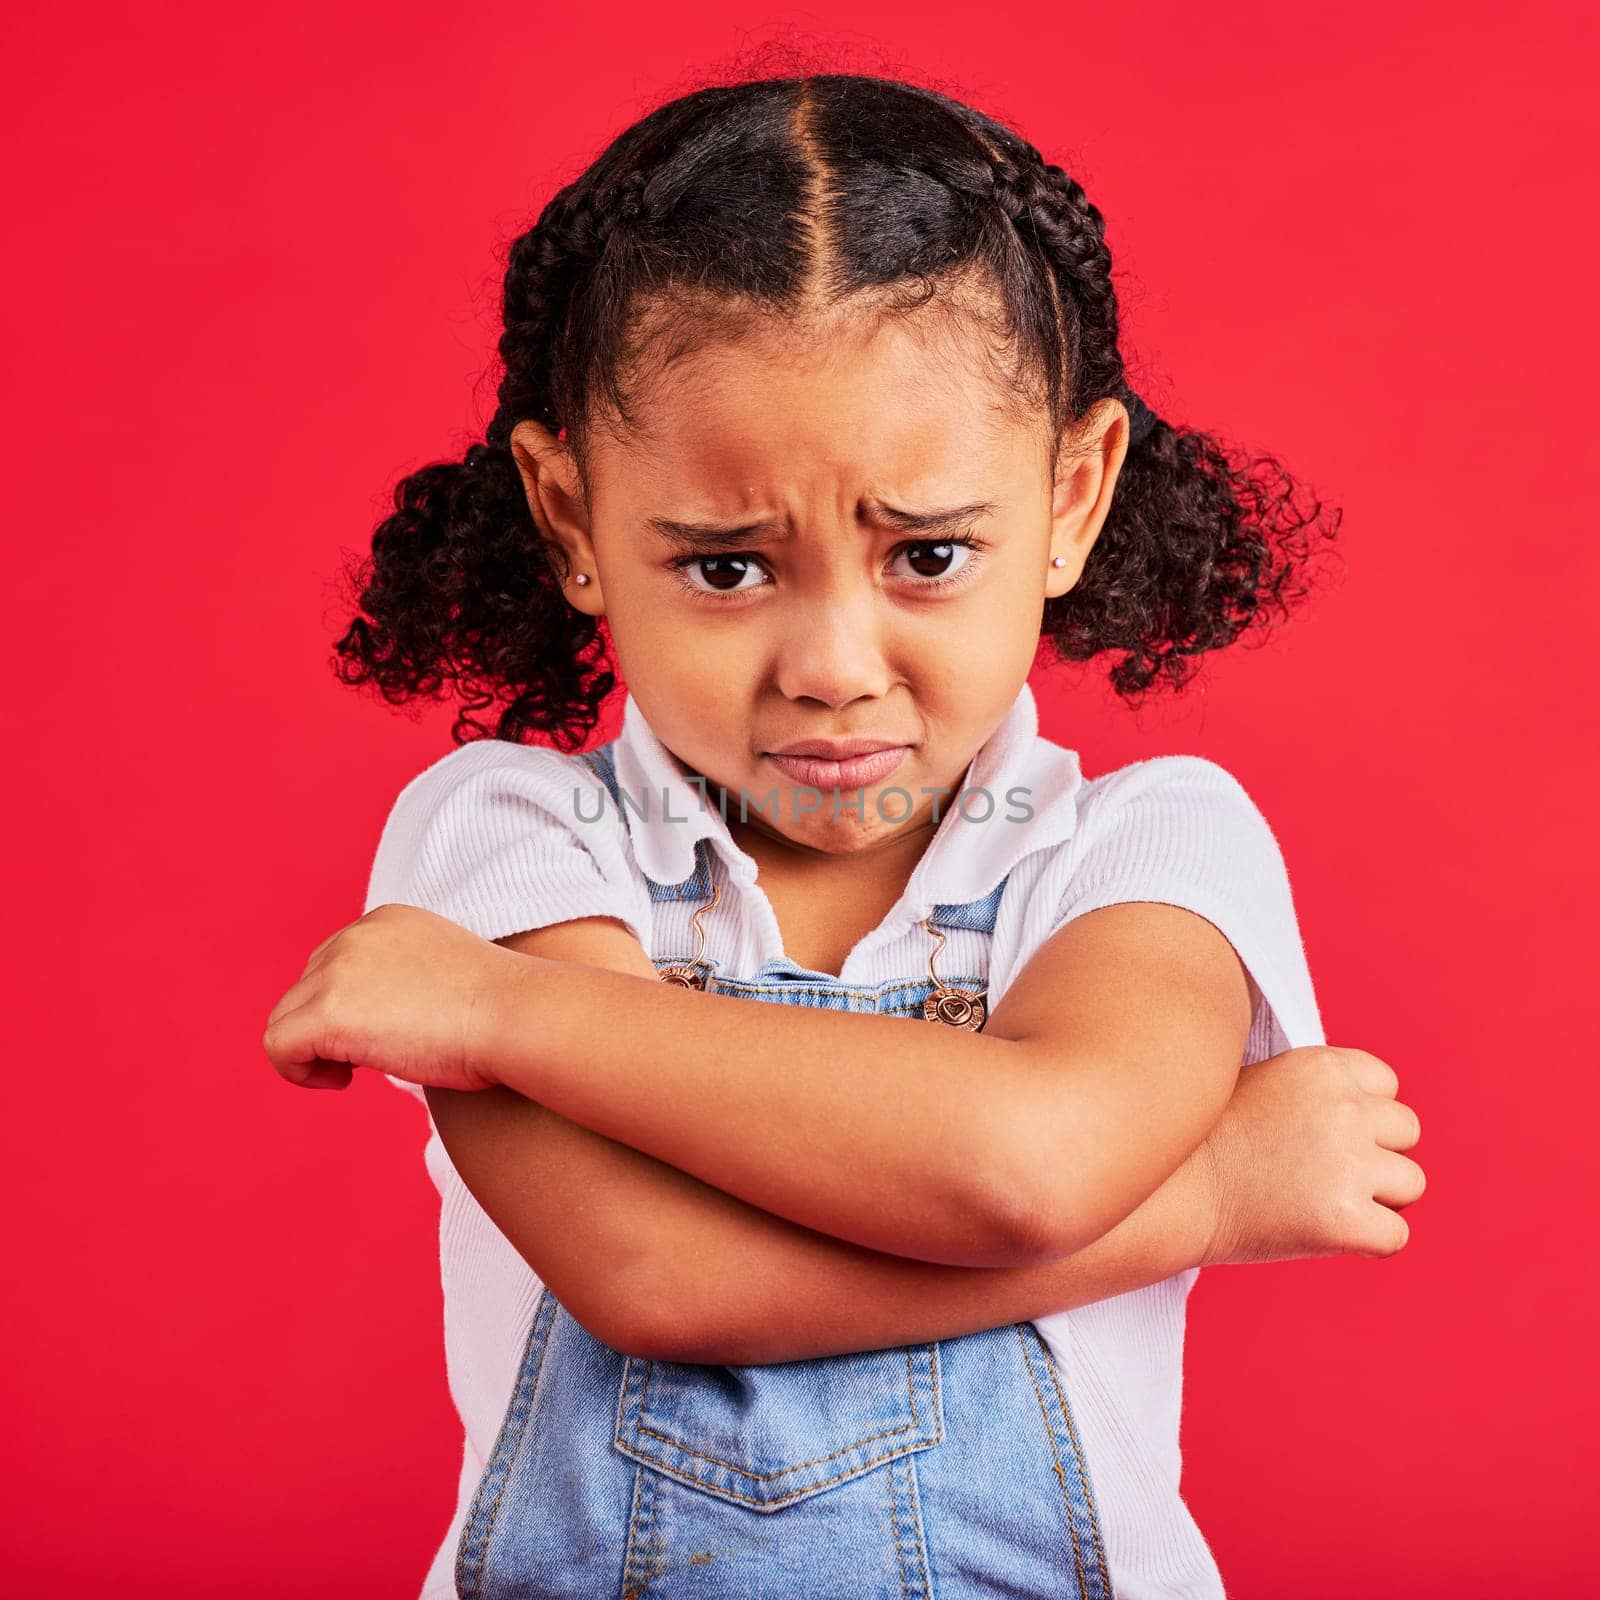 Child, arms crossed or sad portrait on isolated red background for depression, mental health or crying face. Upset, unhappy or little girl with sulking, grumpy or facial expression in bullying crisis.